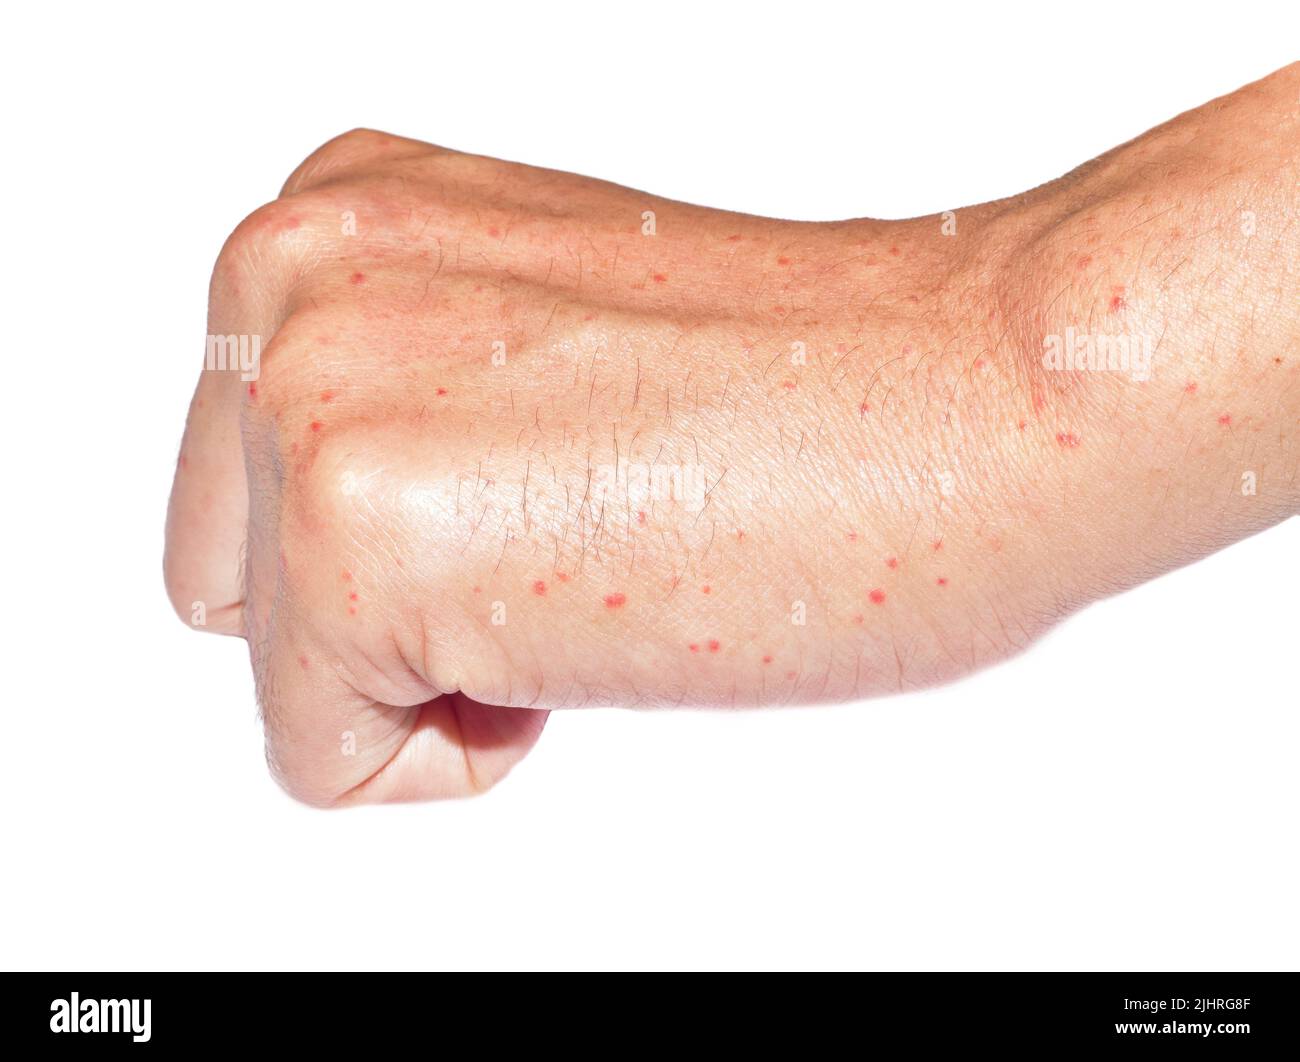 Multiple itchy mosquito or insect bite wheals; red spots on hand of Southeast Asian, Chinese adult young man. Isolated on white background. Stock Photo